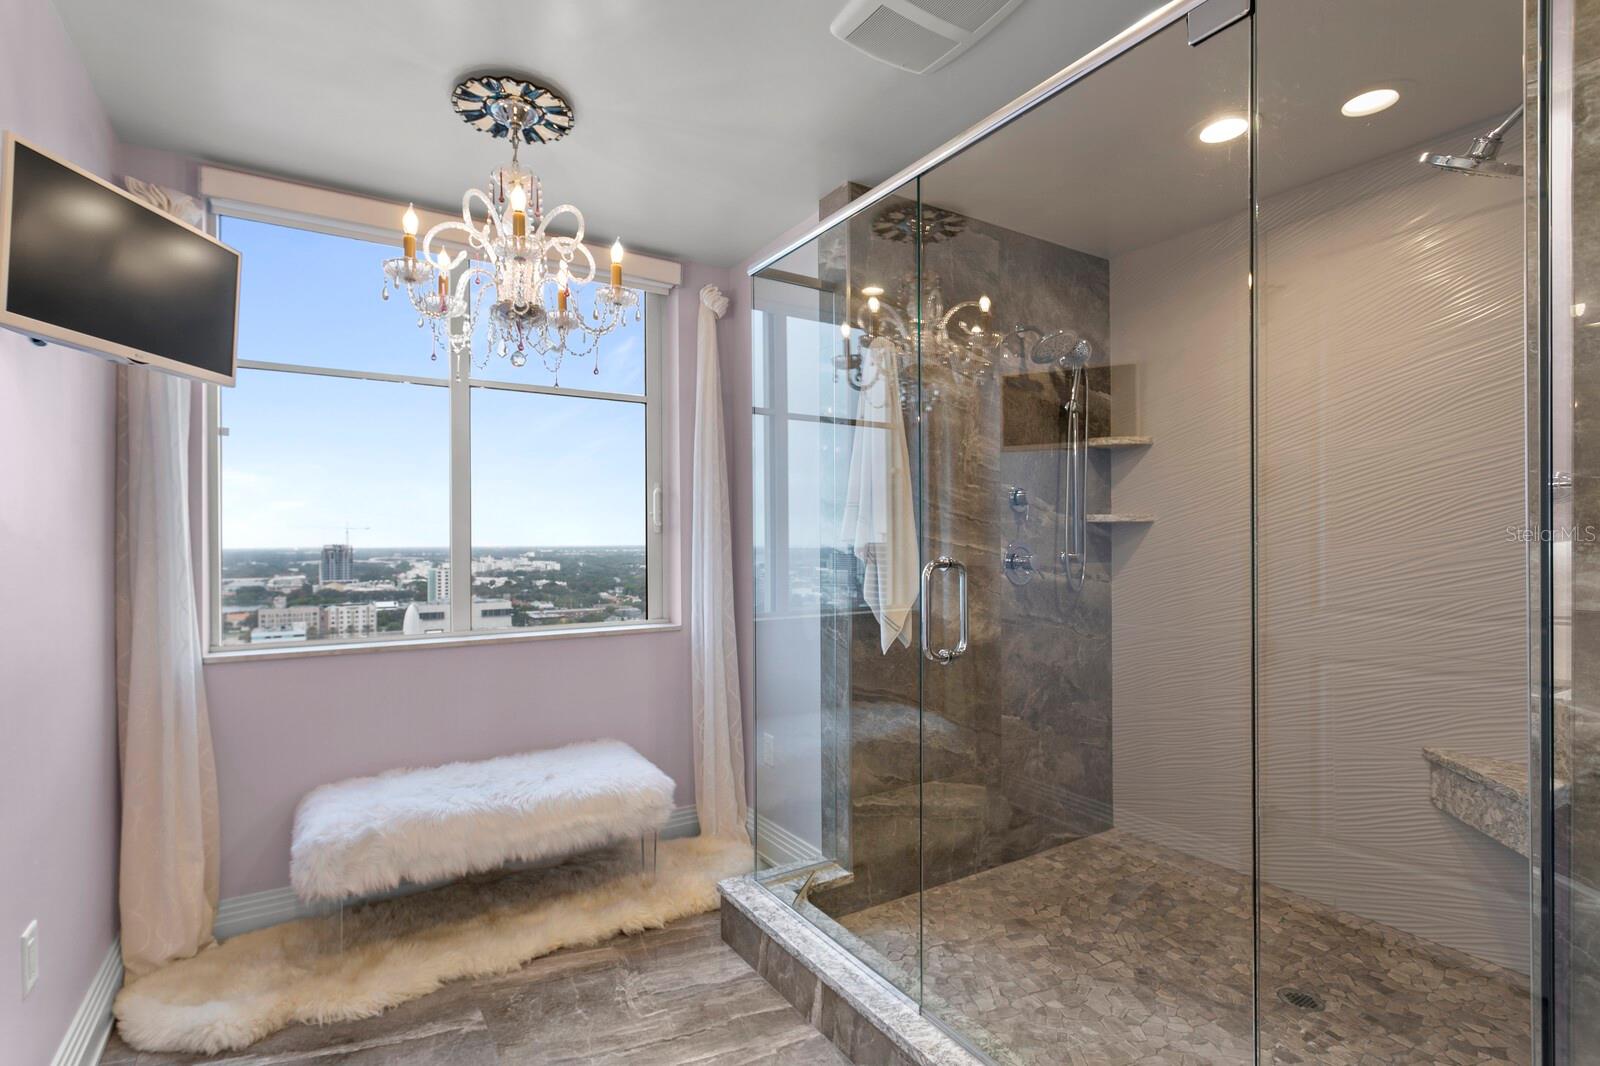 Primary Bathroom features an oversized shower with twin shower heads and custom tile.